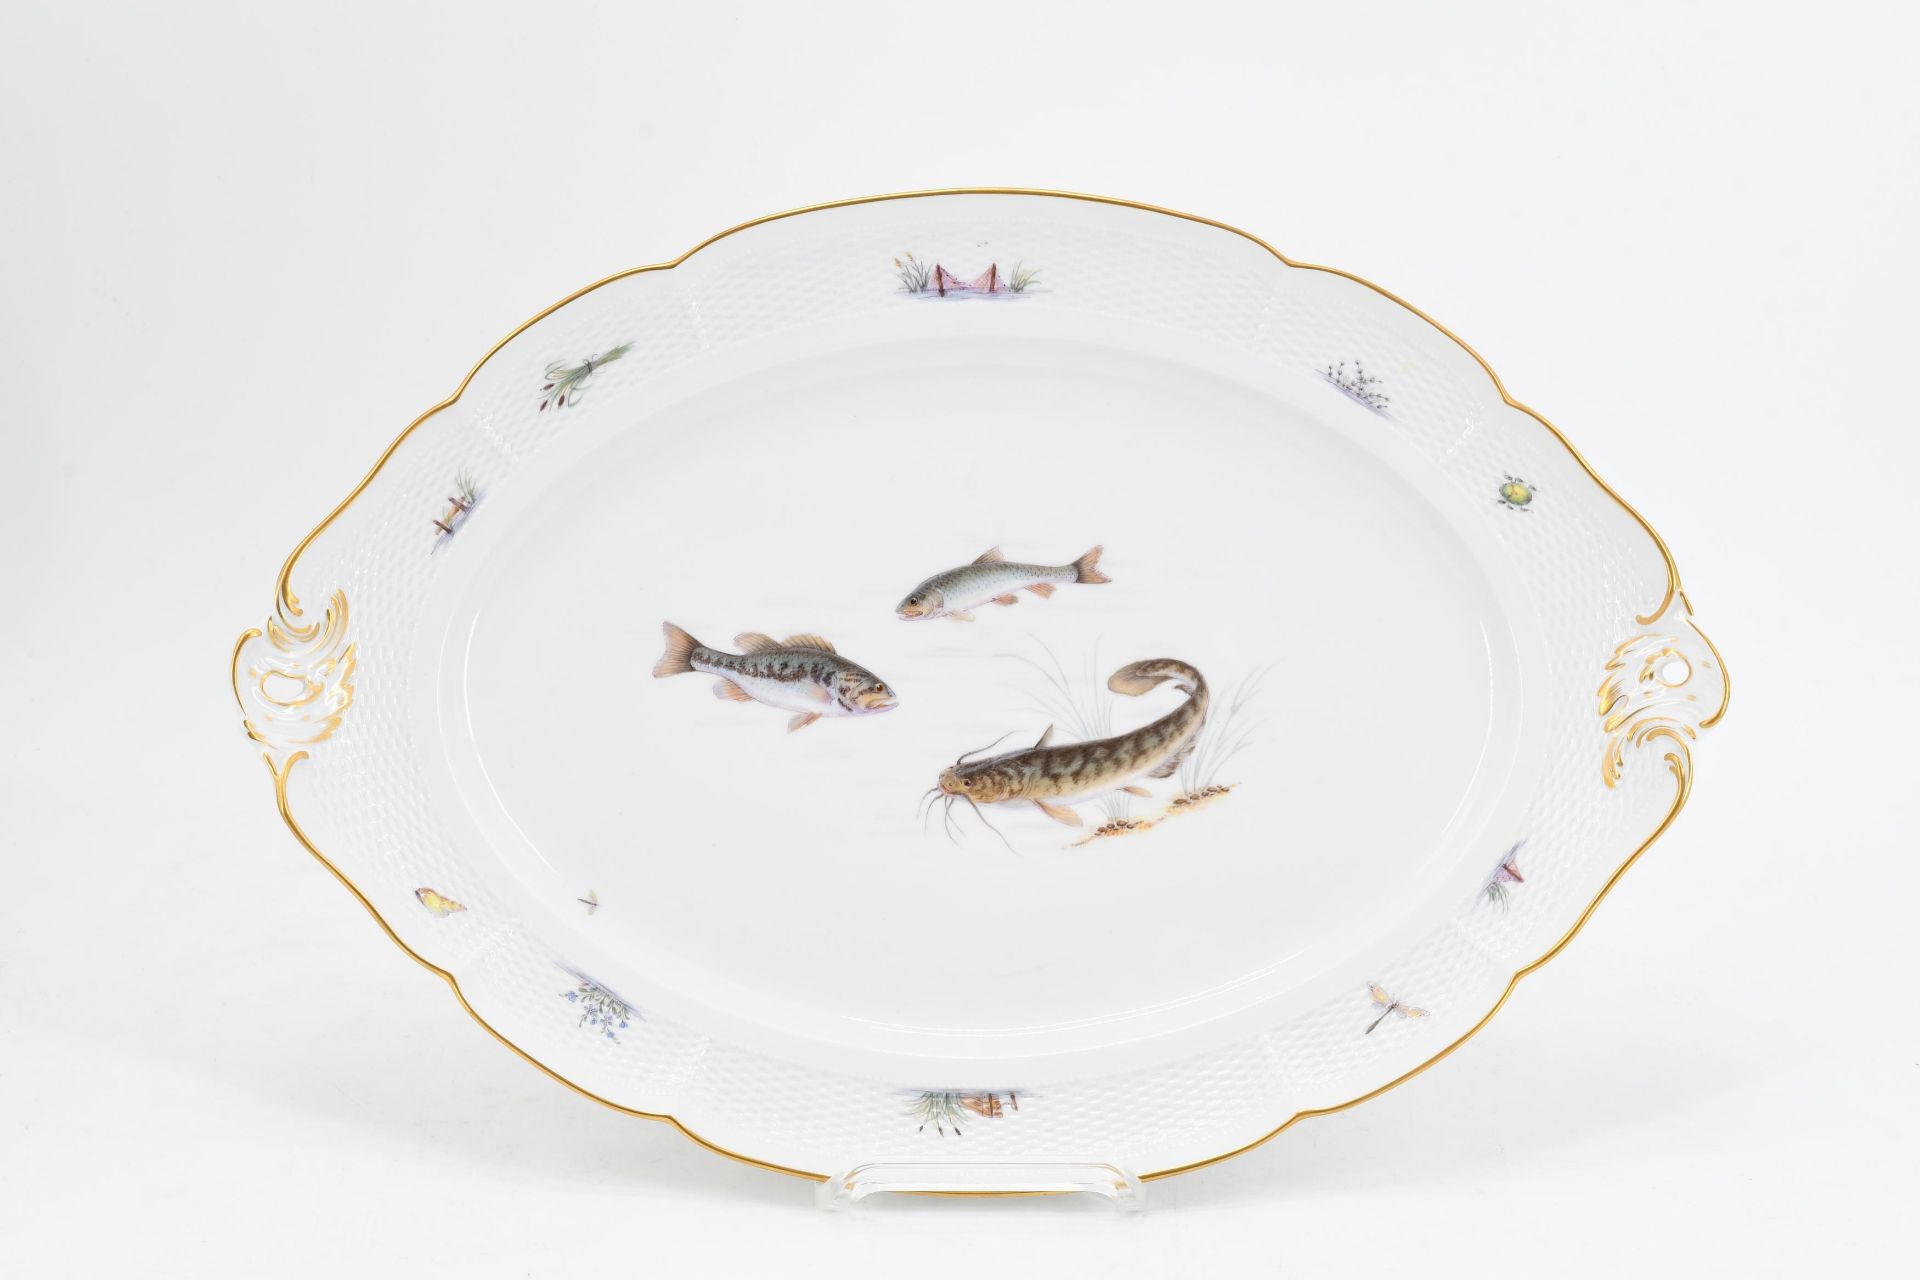 Dinner service with fish decor for 6 persons - Image 4 of 27